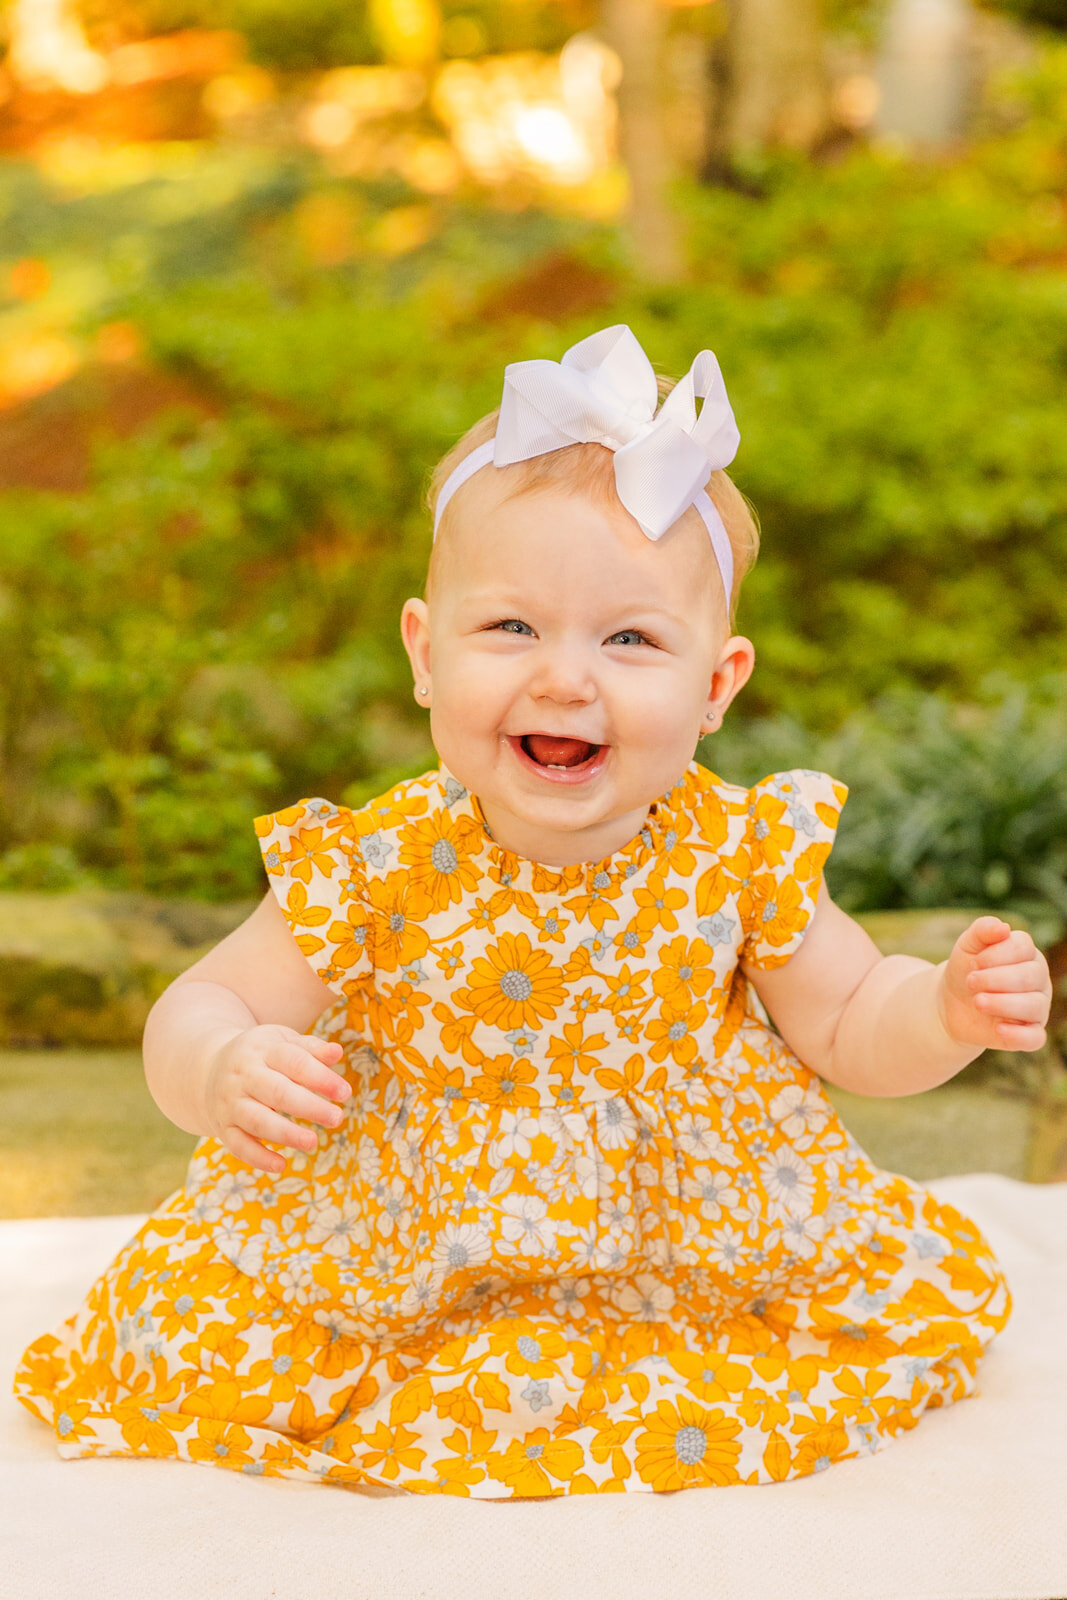 Baby one year girl wearing a yellow dress with flowers sitting on a white blanket and smiling at the camera on a Atlanta park path by Laure Photography